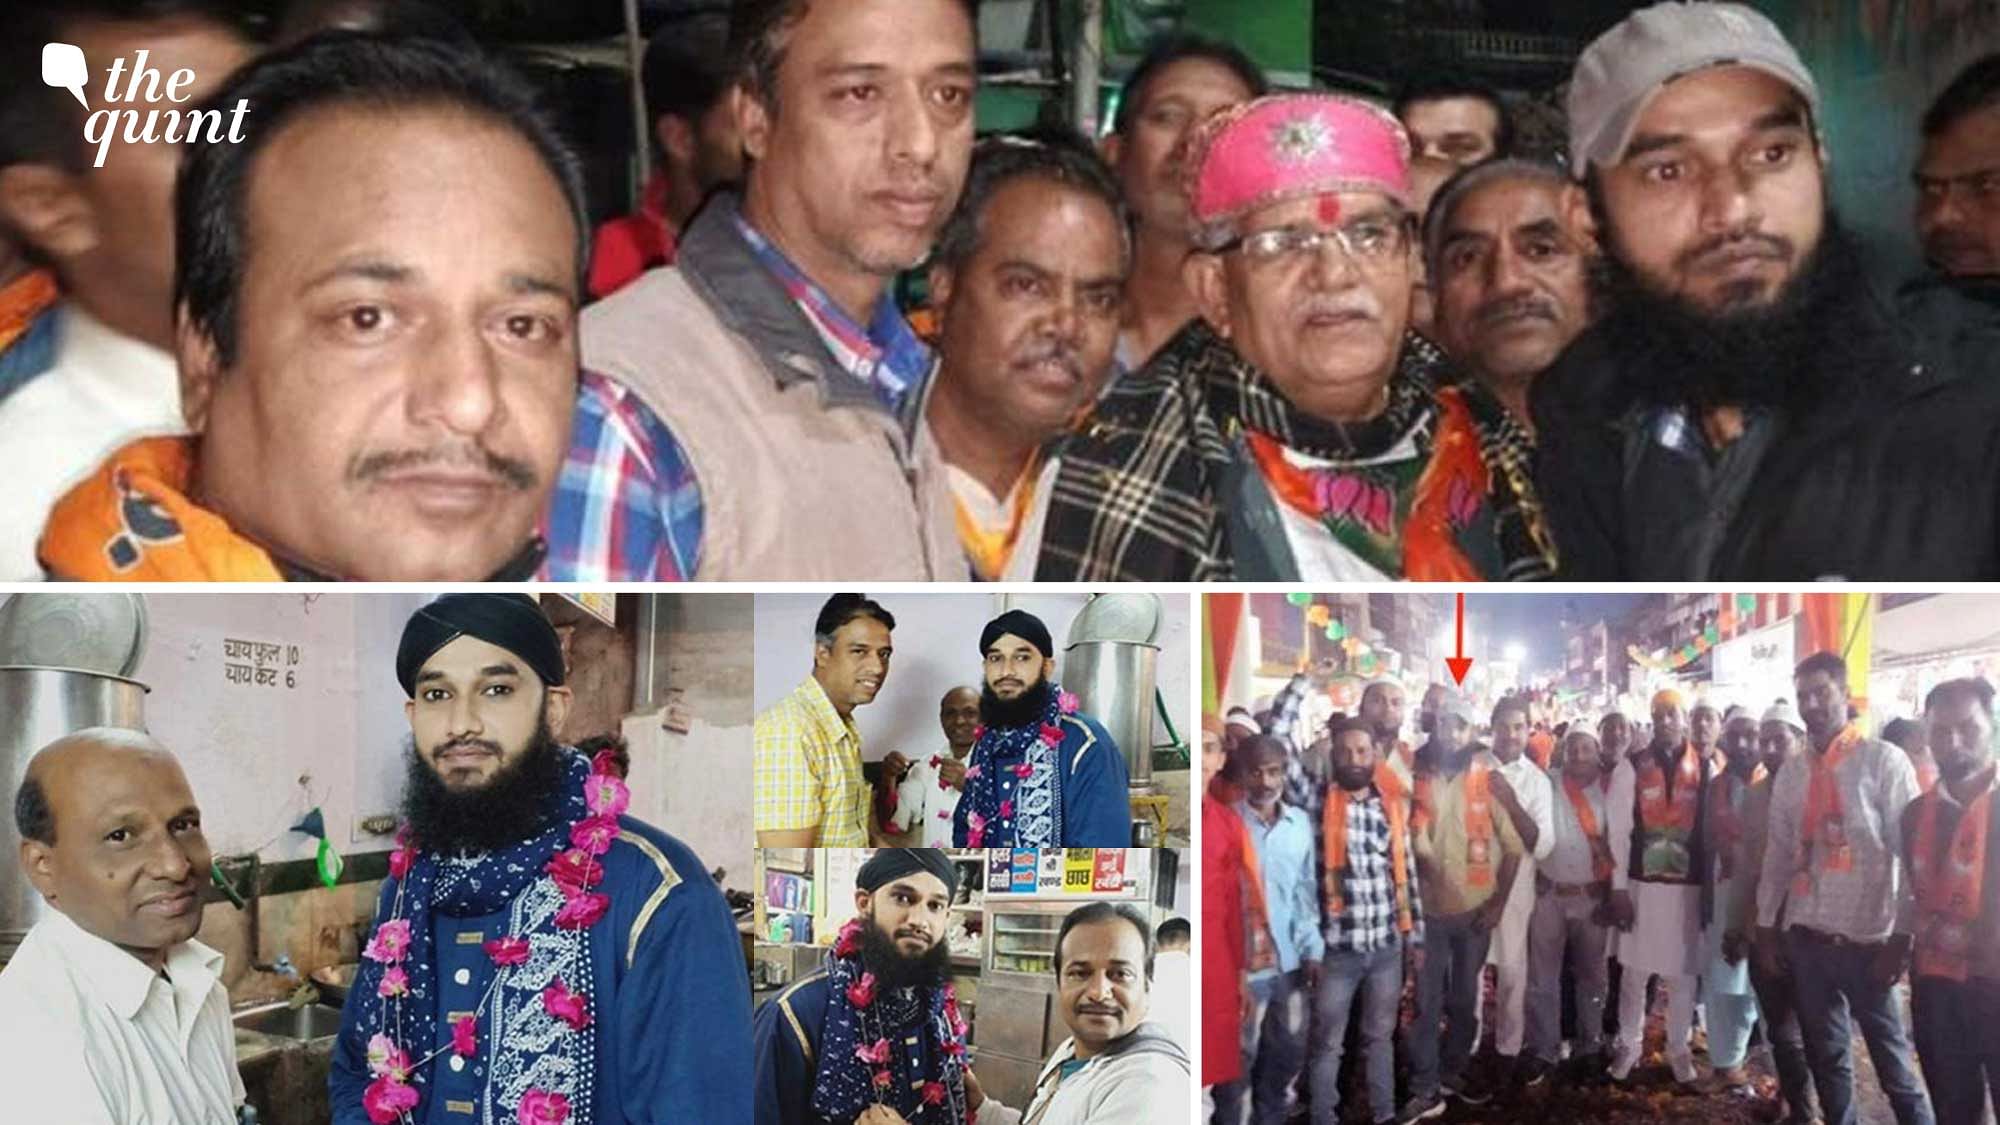 <div class="paragraphs"><p>The Congress on Saturday, 2 July, alleged that one of the main accused in the <a href="https://www.thequint.com/topic/udaipur-murder">killing of a tailor named Kanhaiya Lal in Udaipur</a> is a 'BJP member.'</p></div>